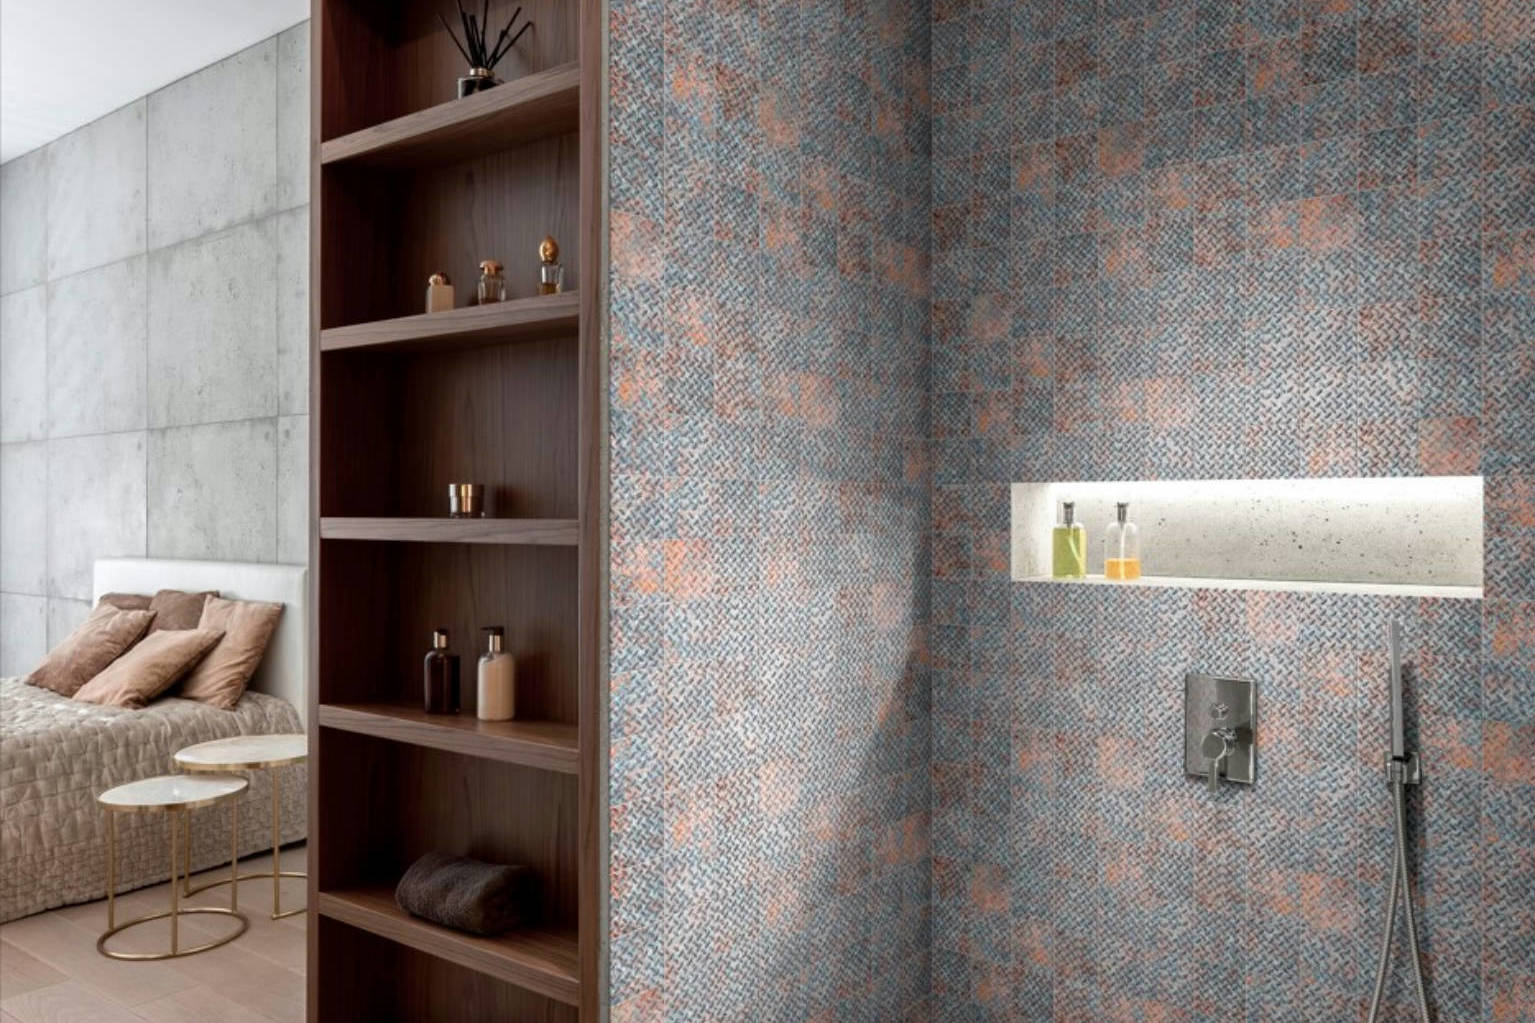 4x4 Rust Industrial Relief Pattern Glazed Ceramic Mosaic | Qualis Ceramica | Luxury Tile and Vinyl at affordable prices